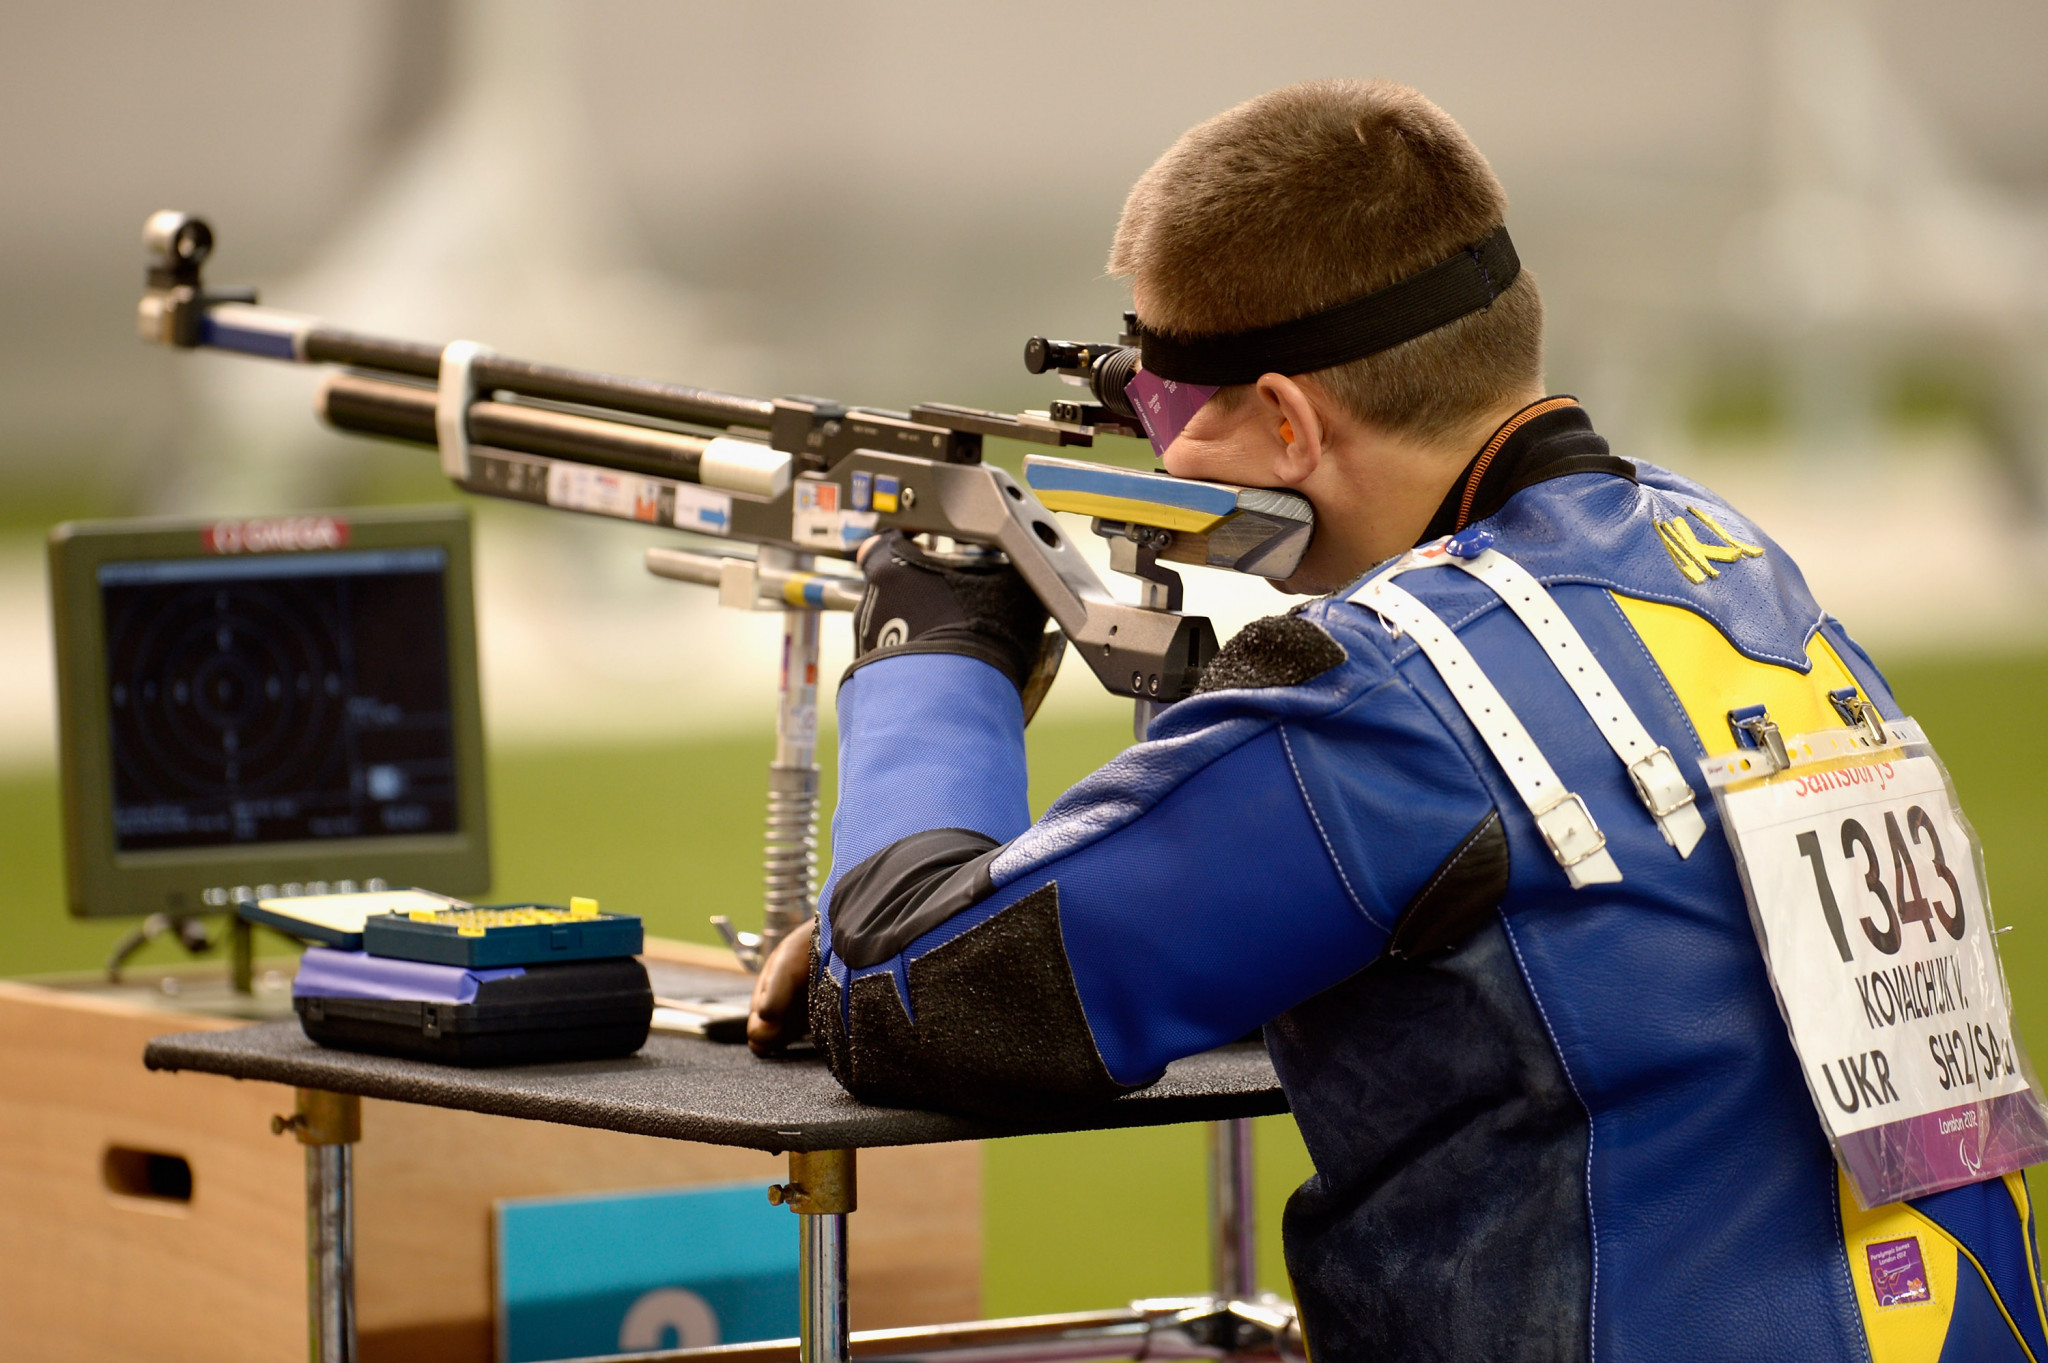 Shooters will be using the event to prepare for the 2018 World Shooting Para Sport Championships ©Getty Images